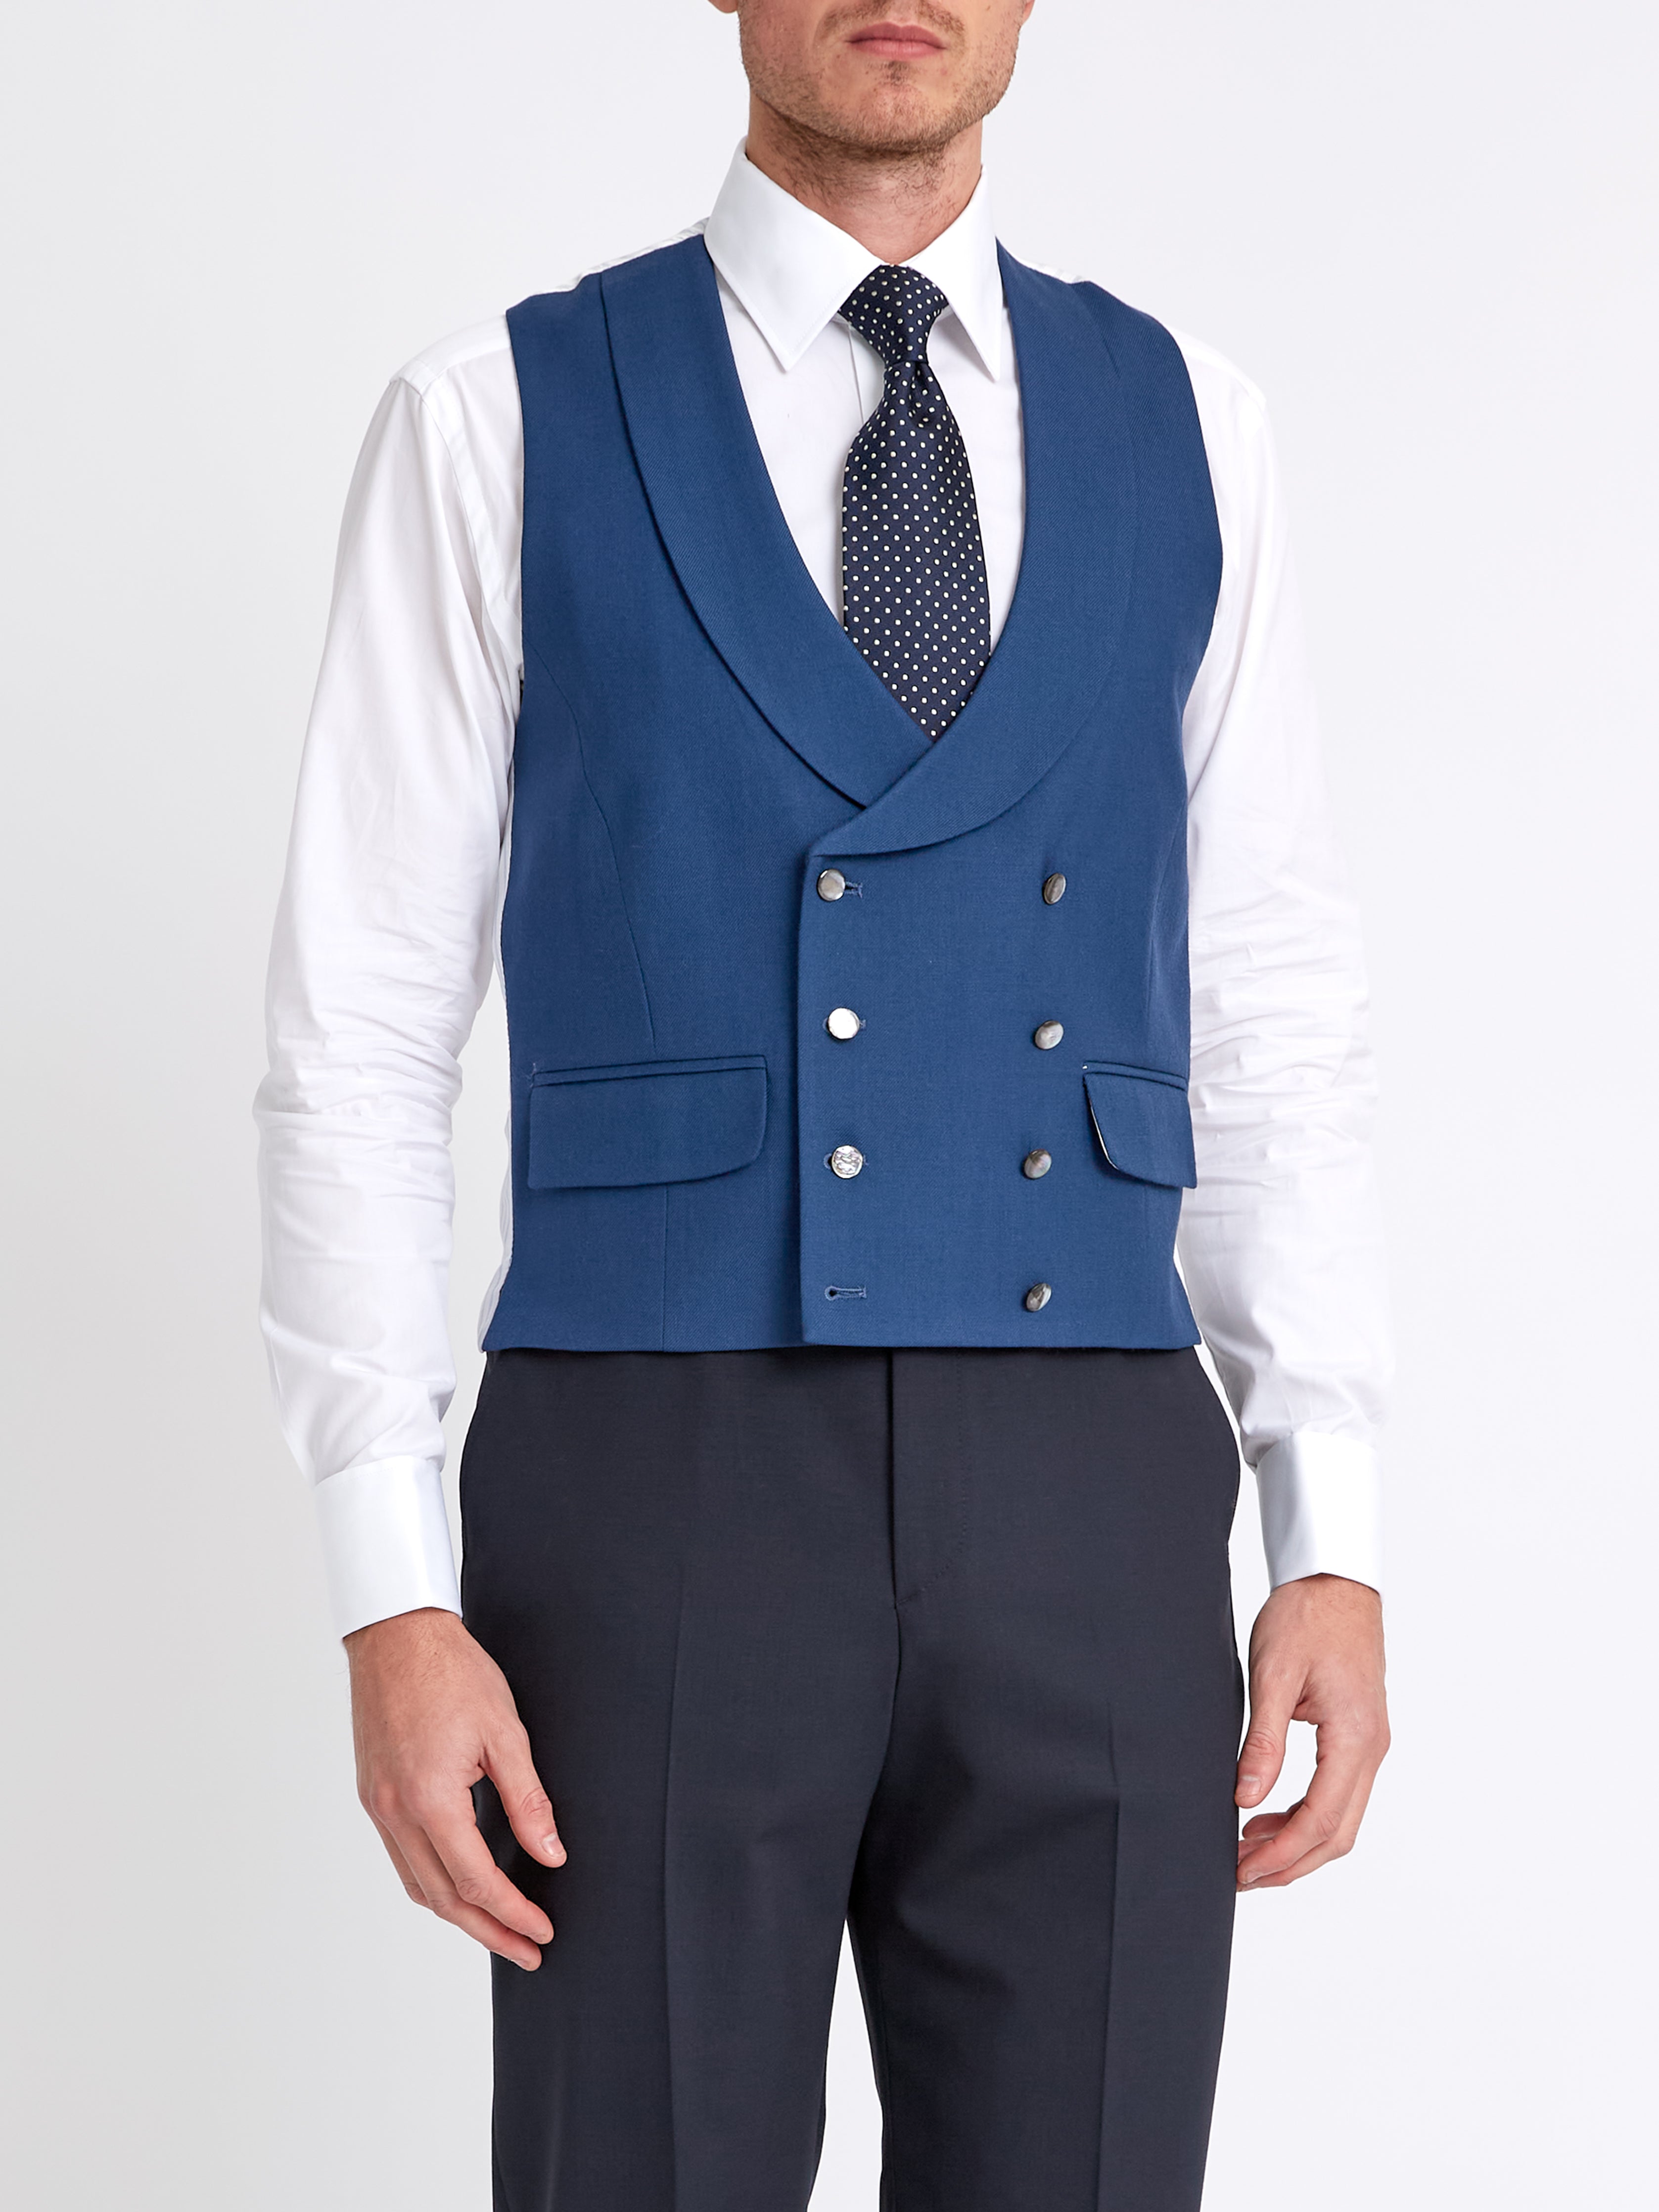 Storm Blue Wool Double-Breasted 8-Button Shawl Lapel Waistcoat